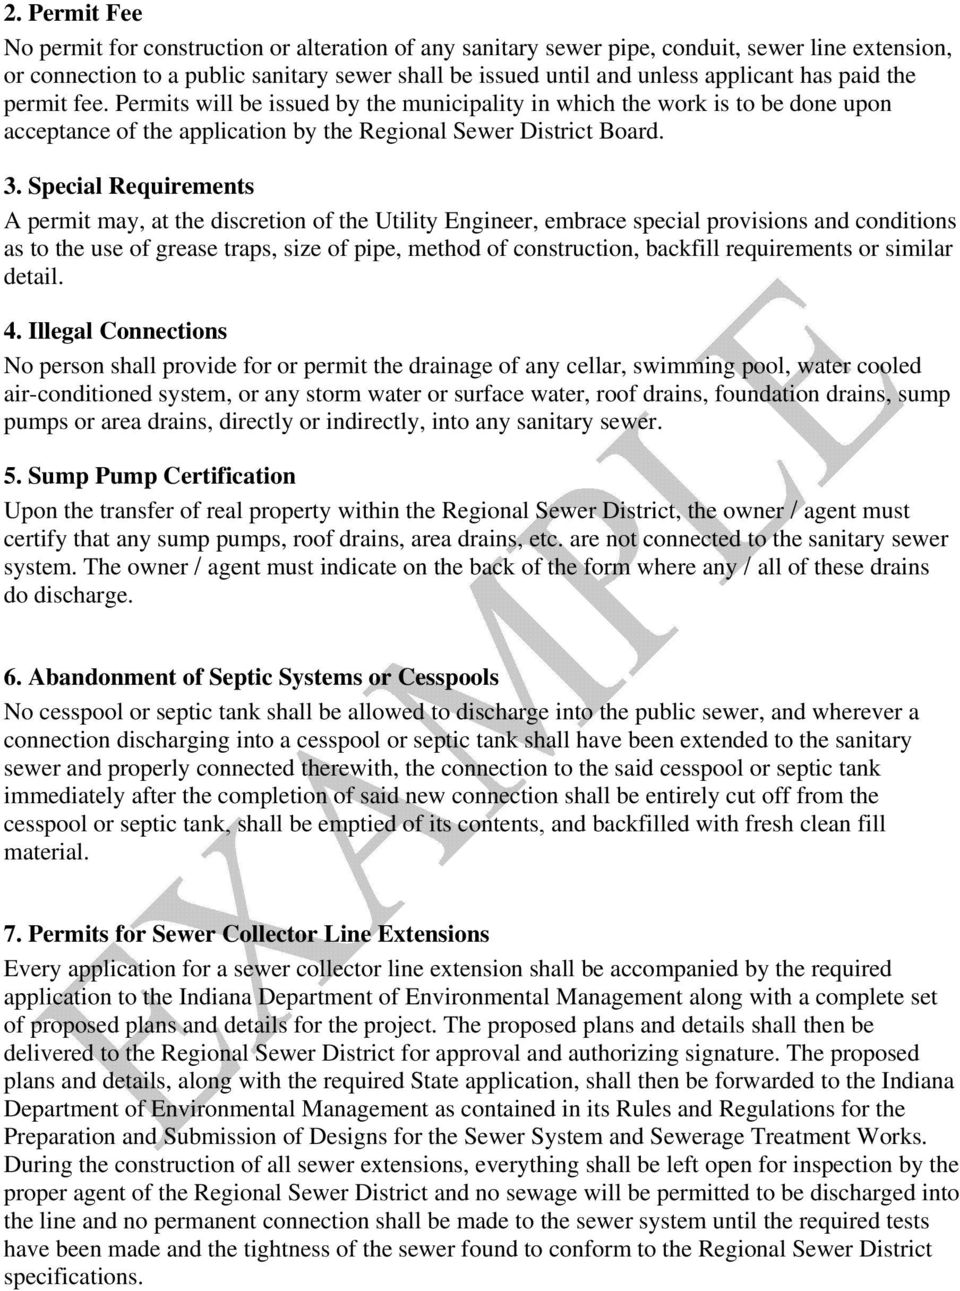 Special Requirements A permit may, at the discretion of the Utility Engineer, embrace special provisions and conditions as to the use of grease traps, size of pipe, method of construction, backfill